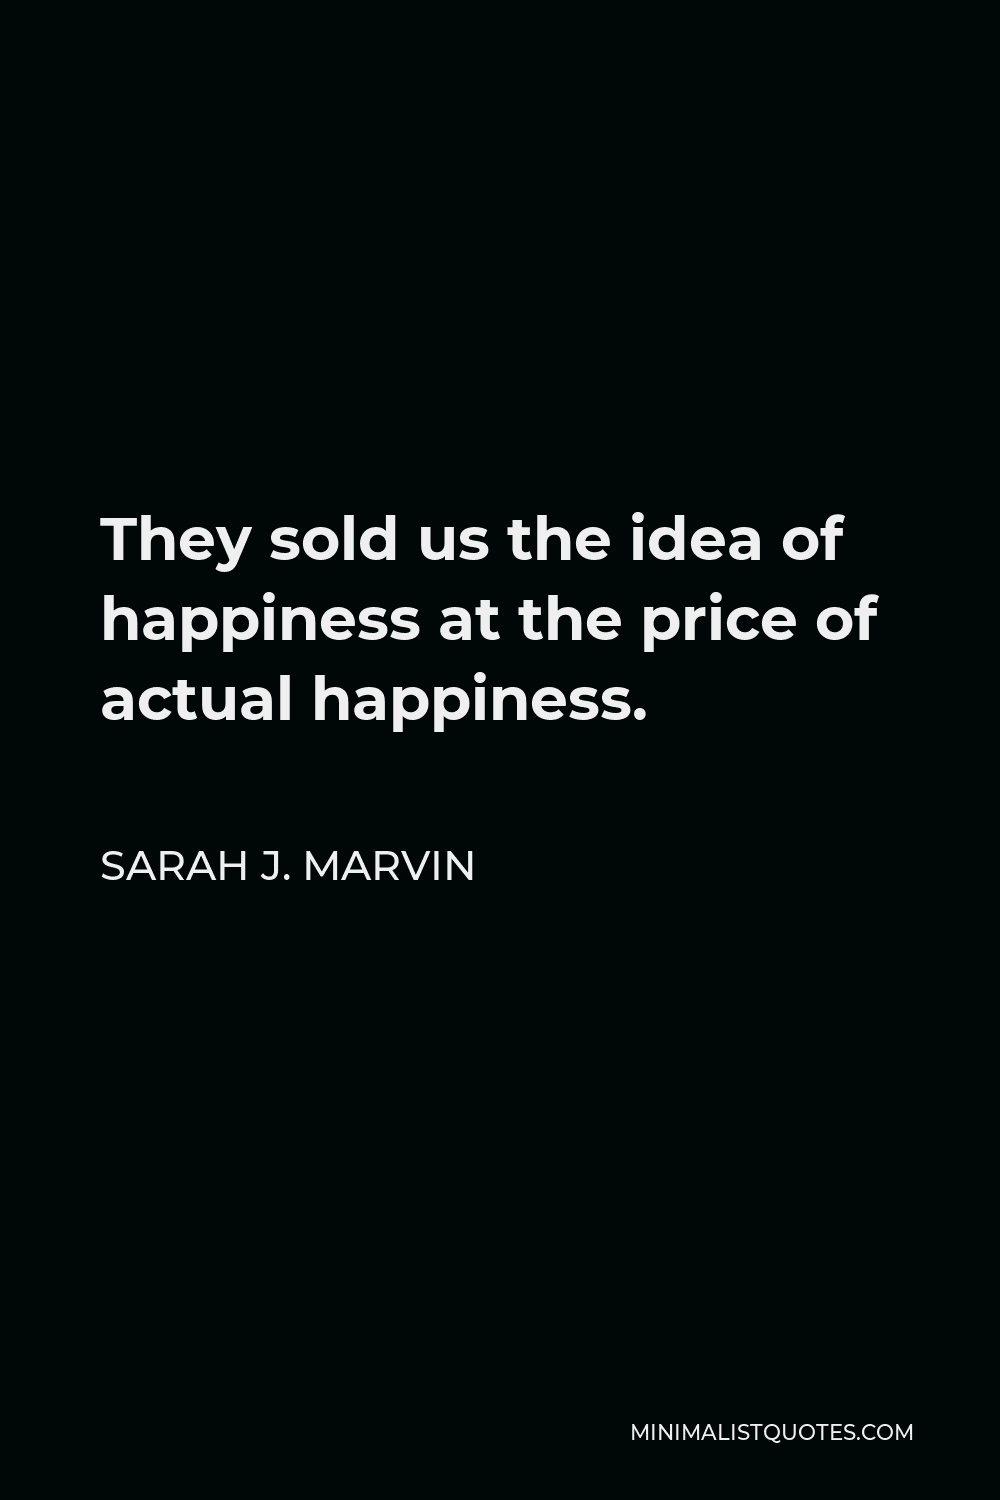 Sarah J. Marvin Quote - They sold us the idea of happiness at the price of actual happiness.